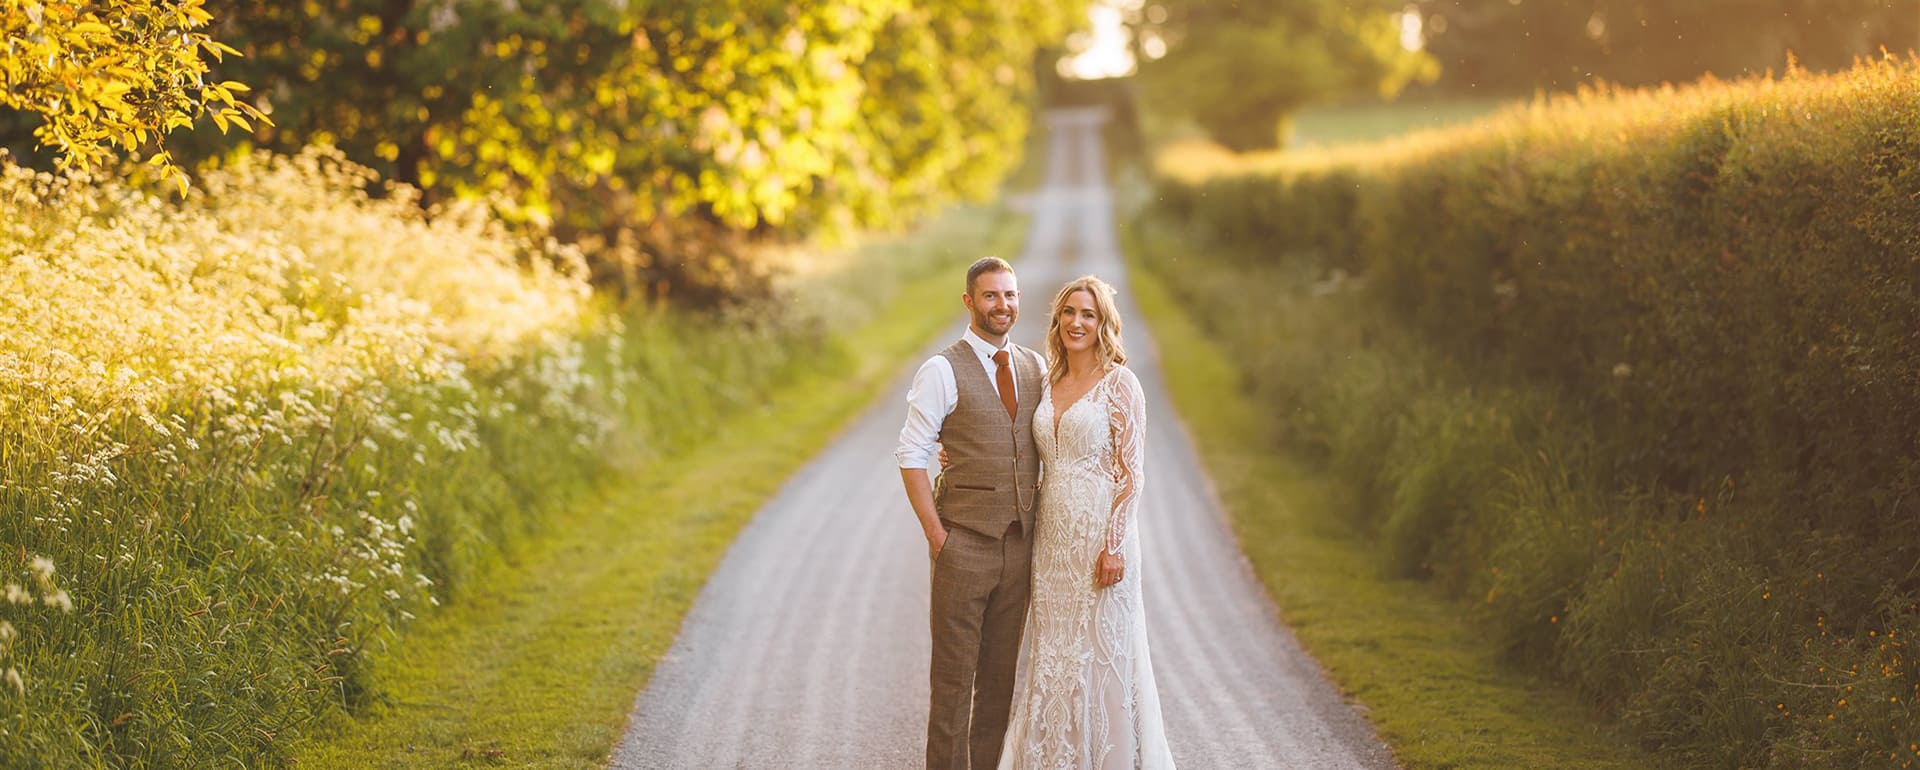 Amy & Phil’s Spring Woodland Wedding at Broadfield Court